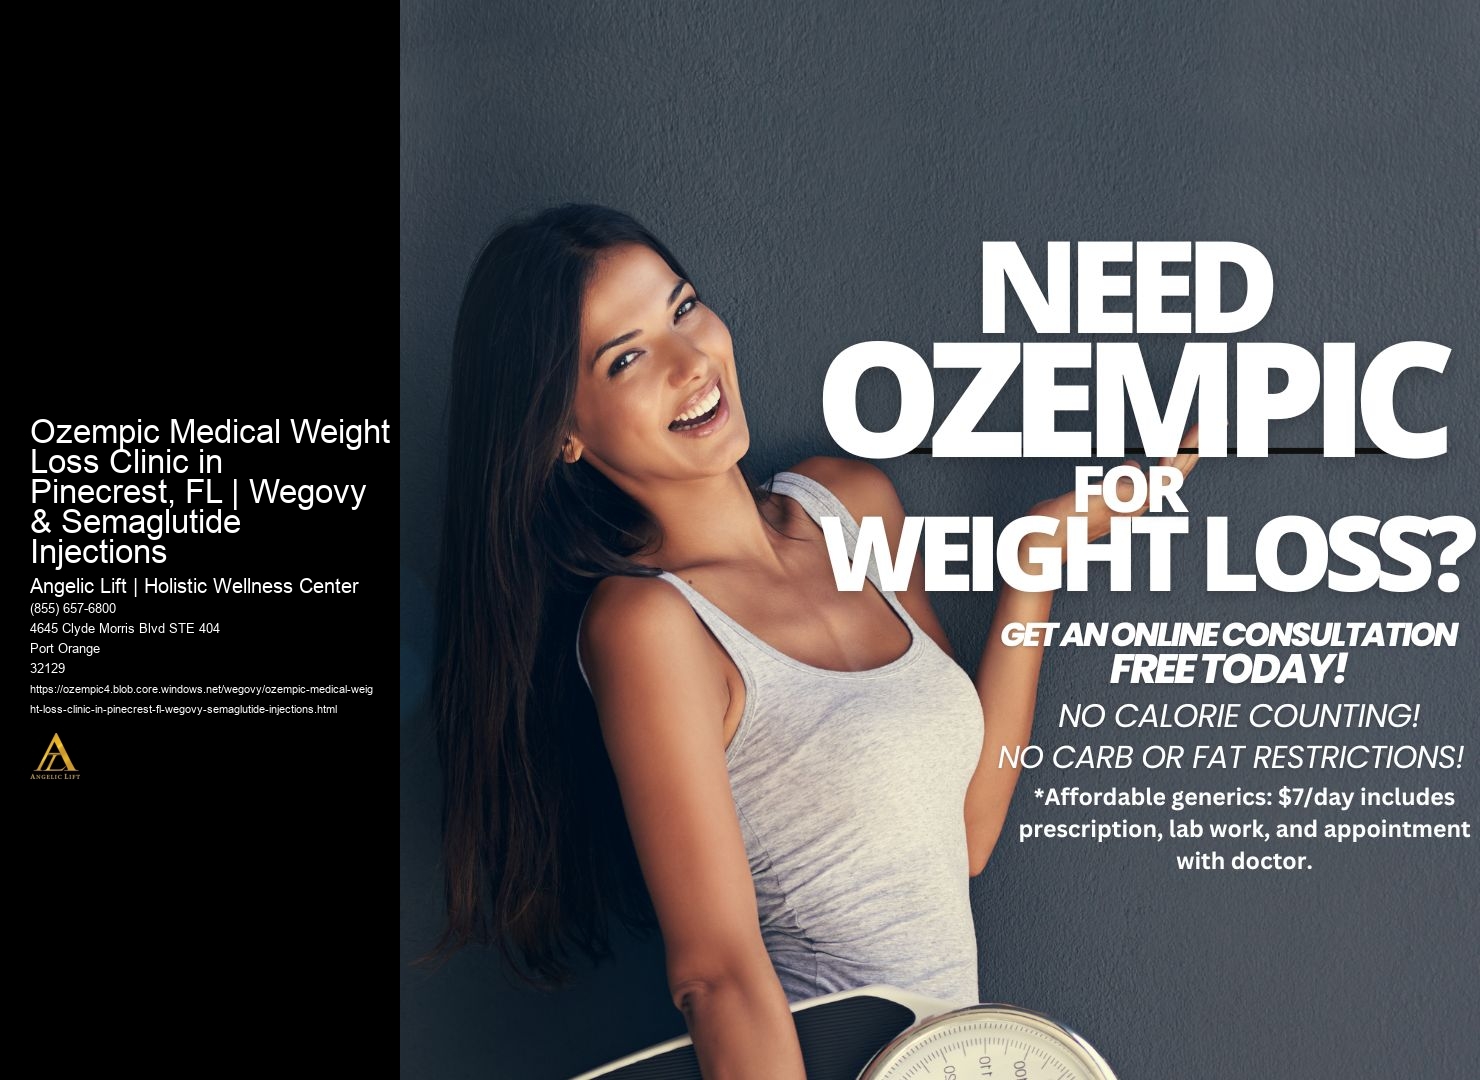 Ozempic Medical Weight Loss Clinic in Pinecrest, FL | Wegovy & Semaglutide Injections